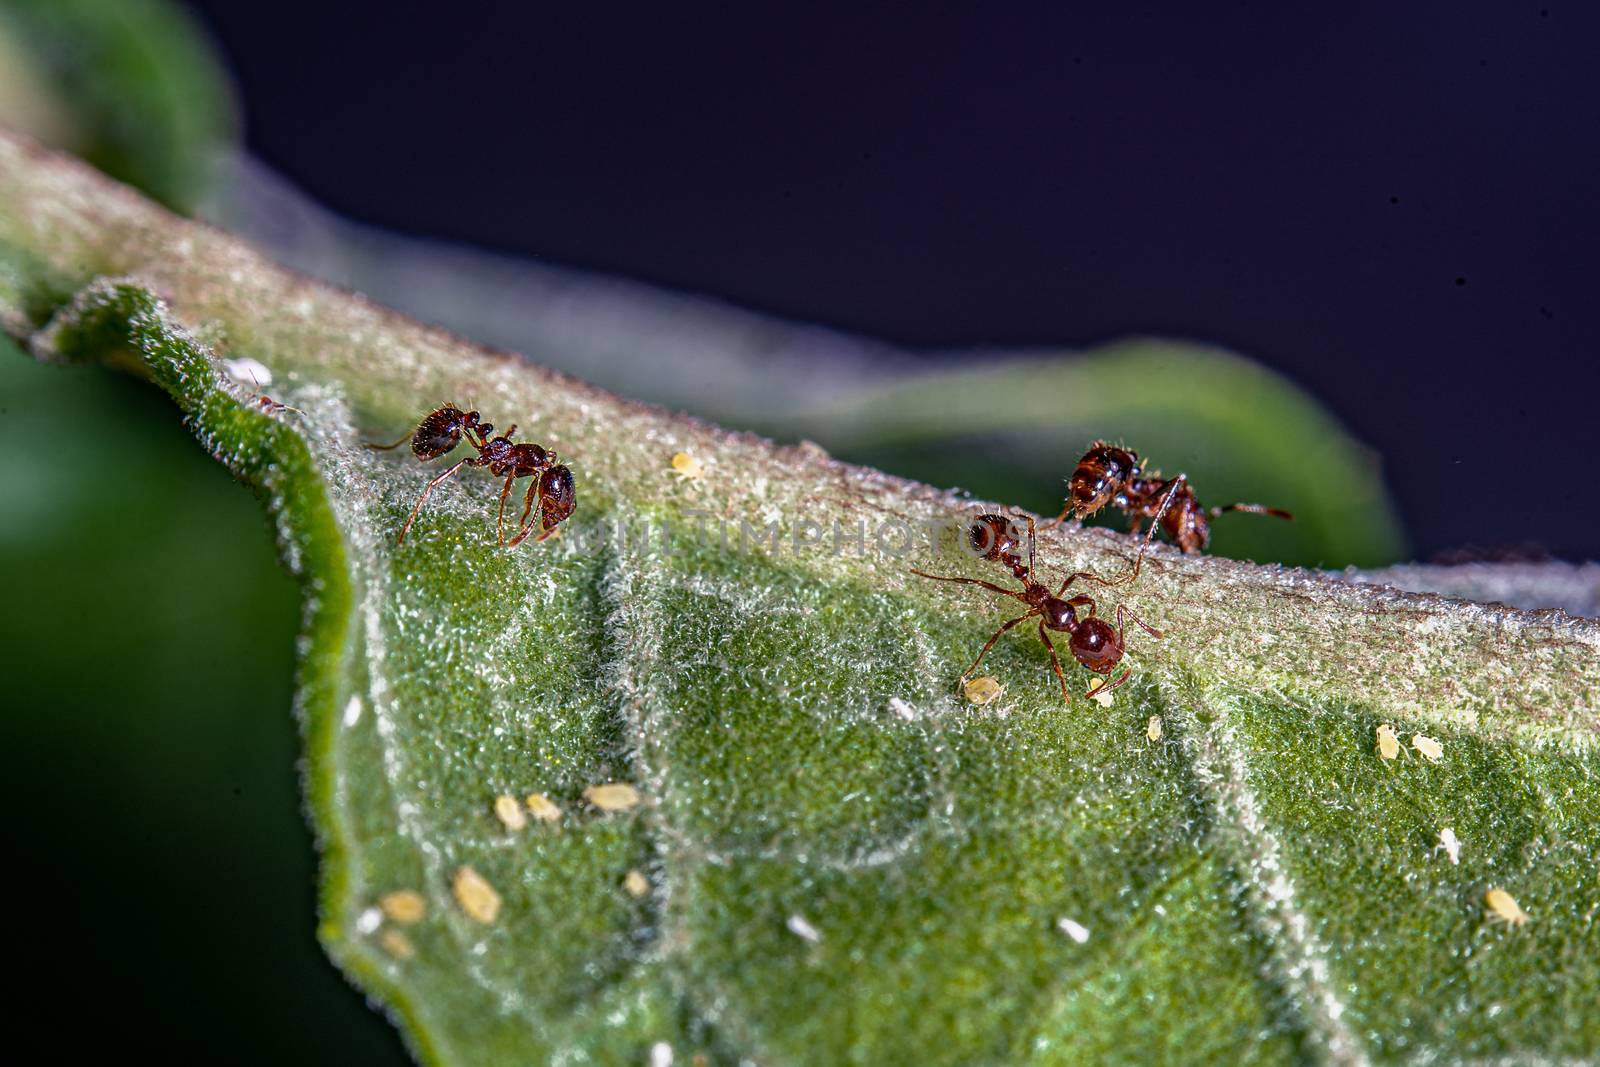 Ants and aphids by jrivalta